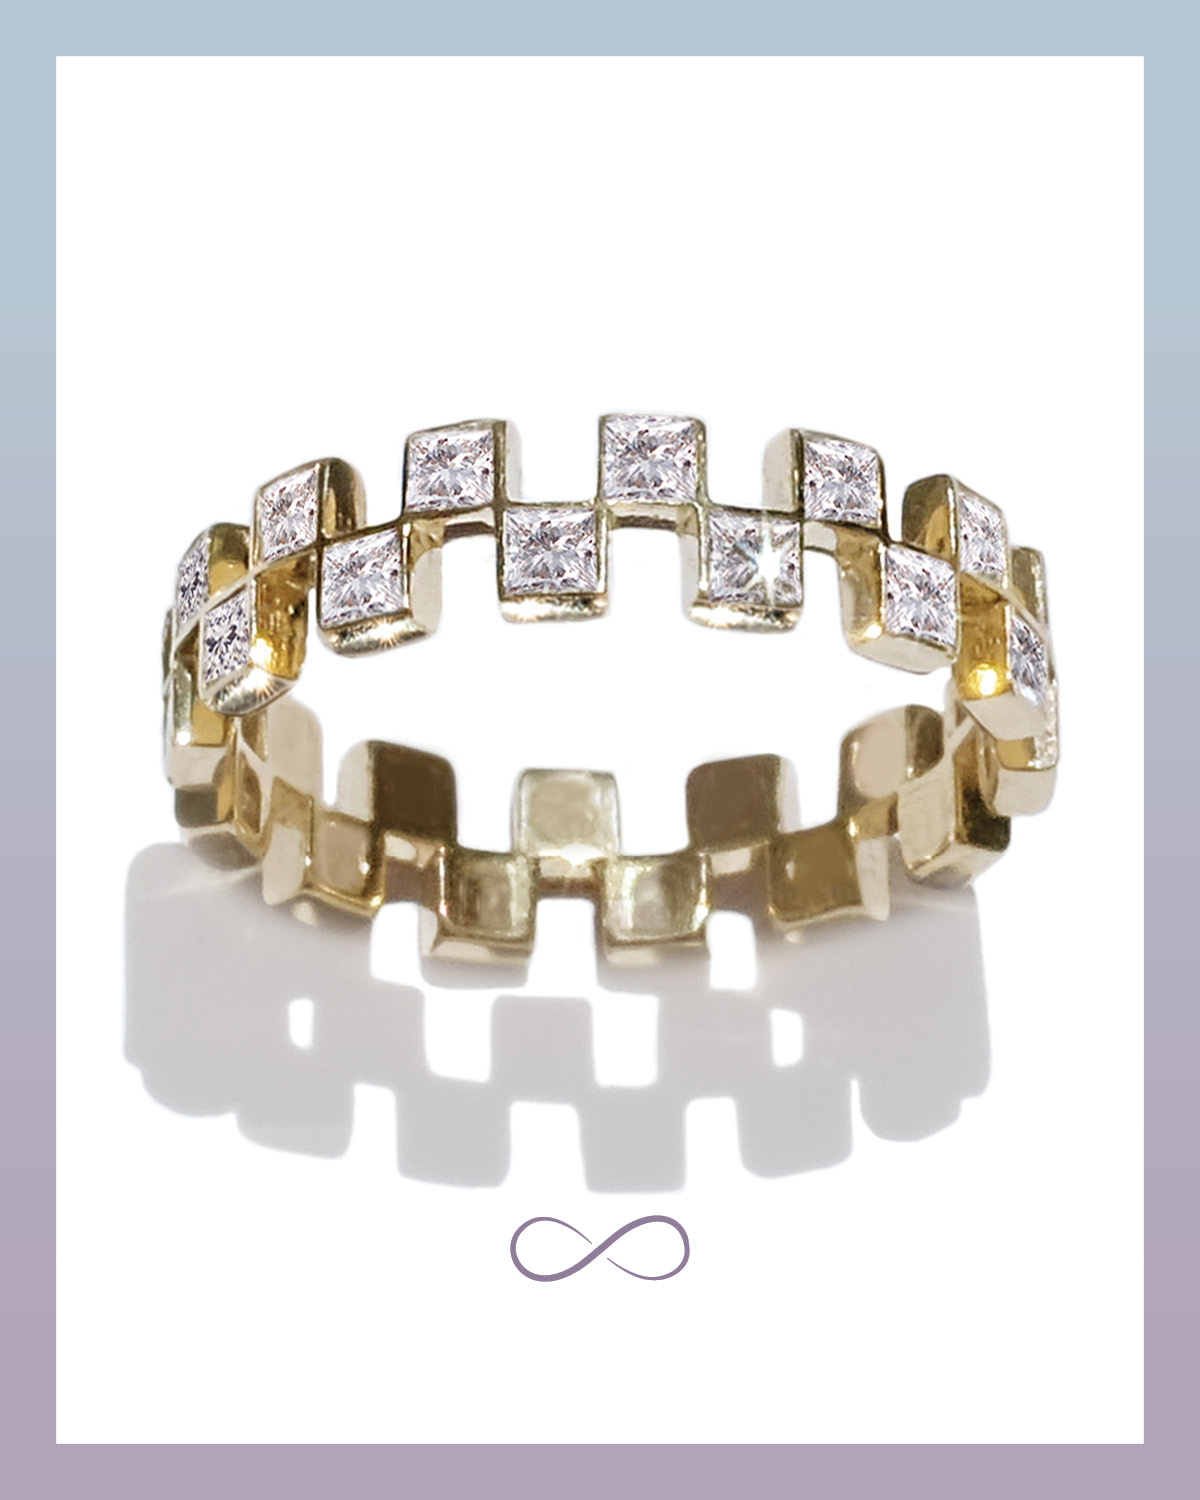 Anerise invisible set princess cut diamond eternity band from Kat Kim that features a checker board design set in yellow gold